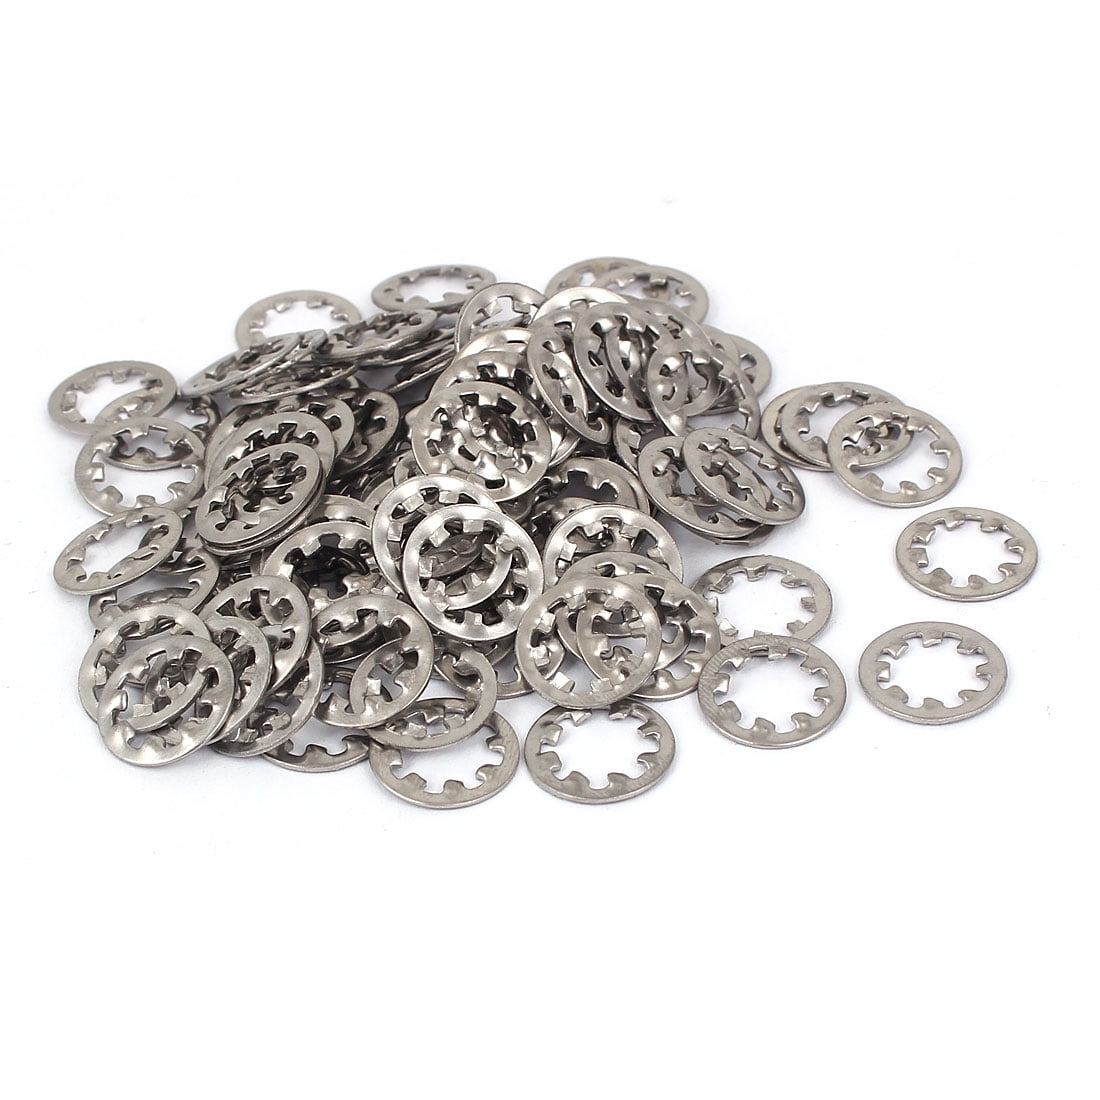 6mm Inner Dia Stainless Steel Internal Tooth Lock Washer Silver Tone 50pcs 